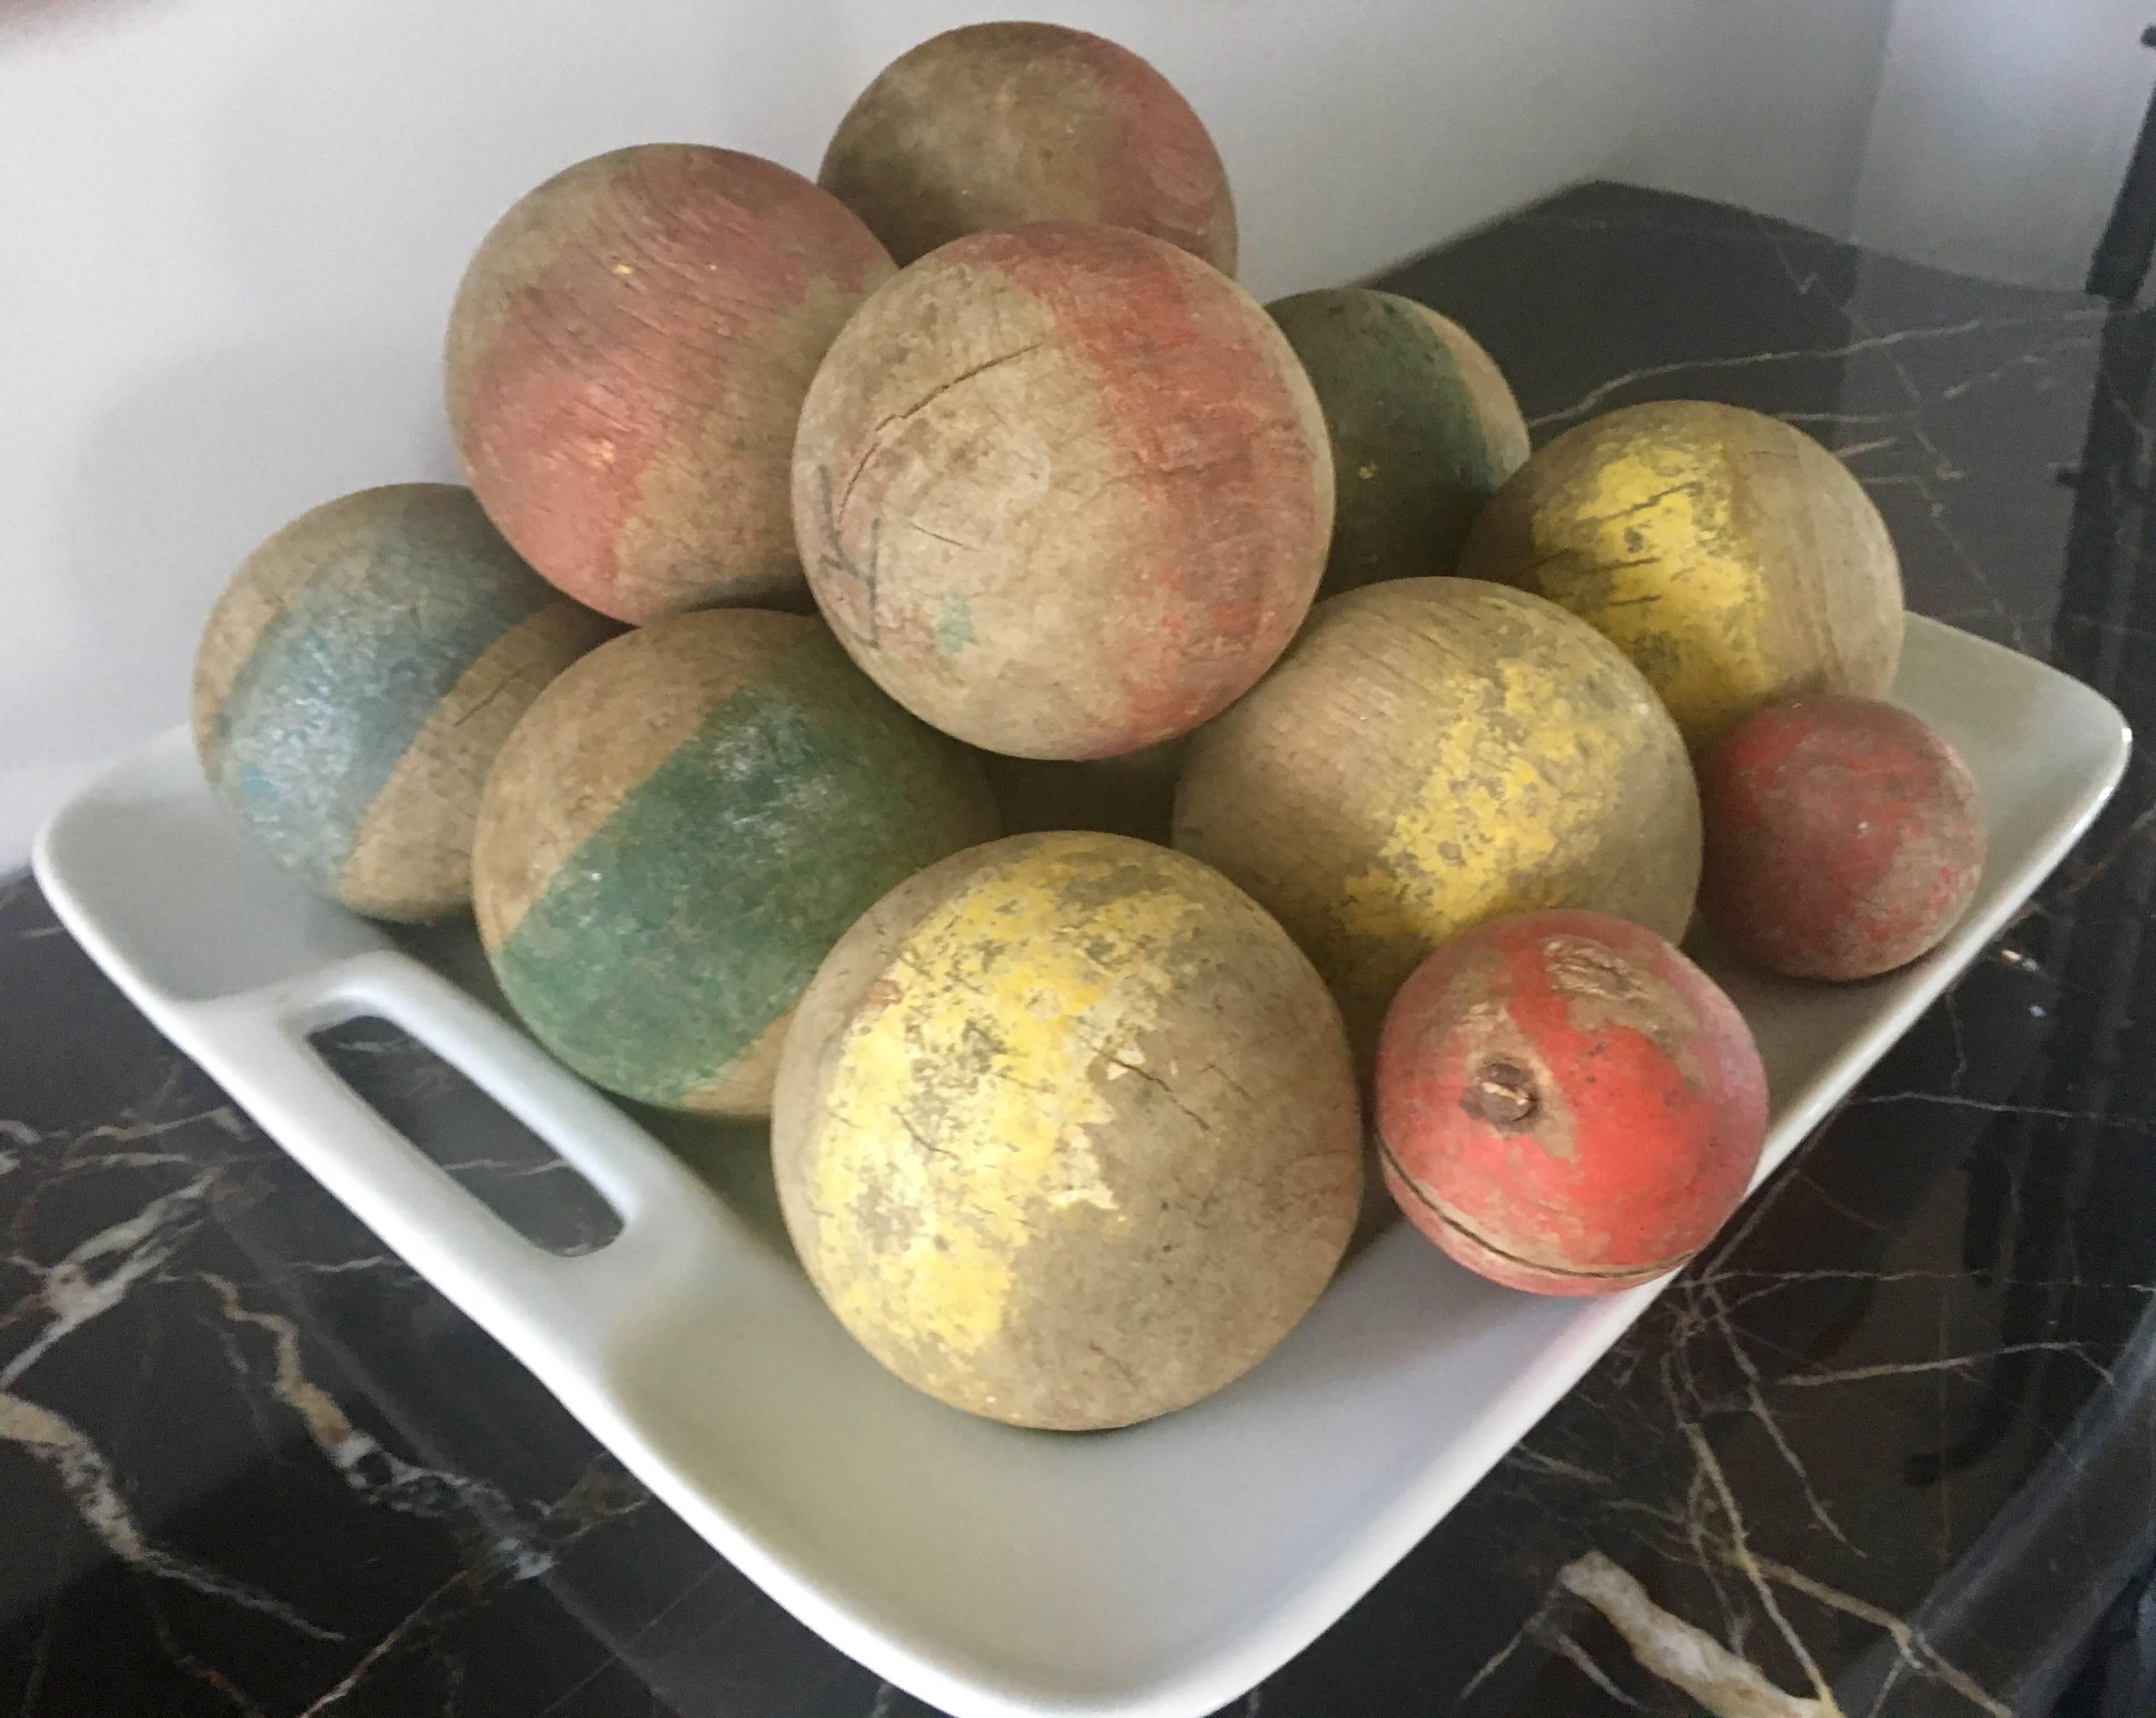 Dating to the late 19th century, this wonderful set of hand-carved French boules comprises twelve large balls, each with worn and original painted stripes in yellow, red, blue and green, and the two smaller accompanying target balls, both in red. We